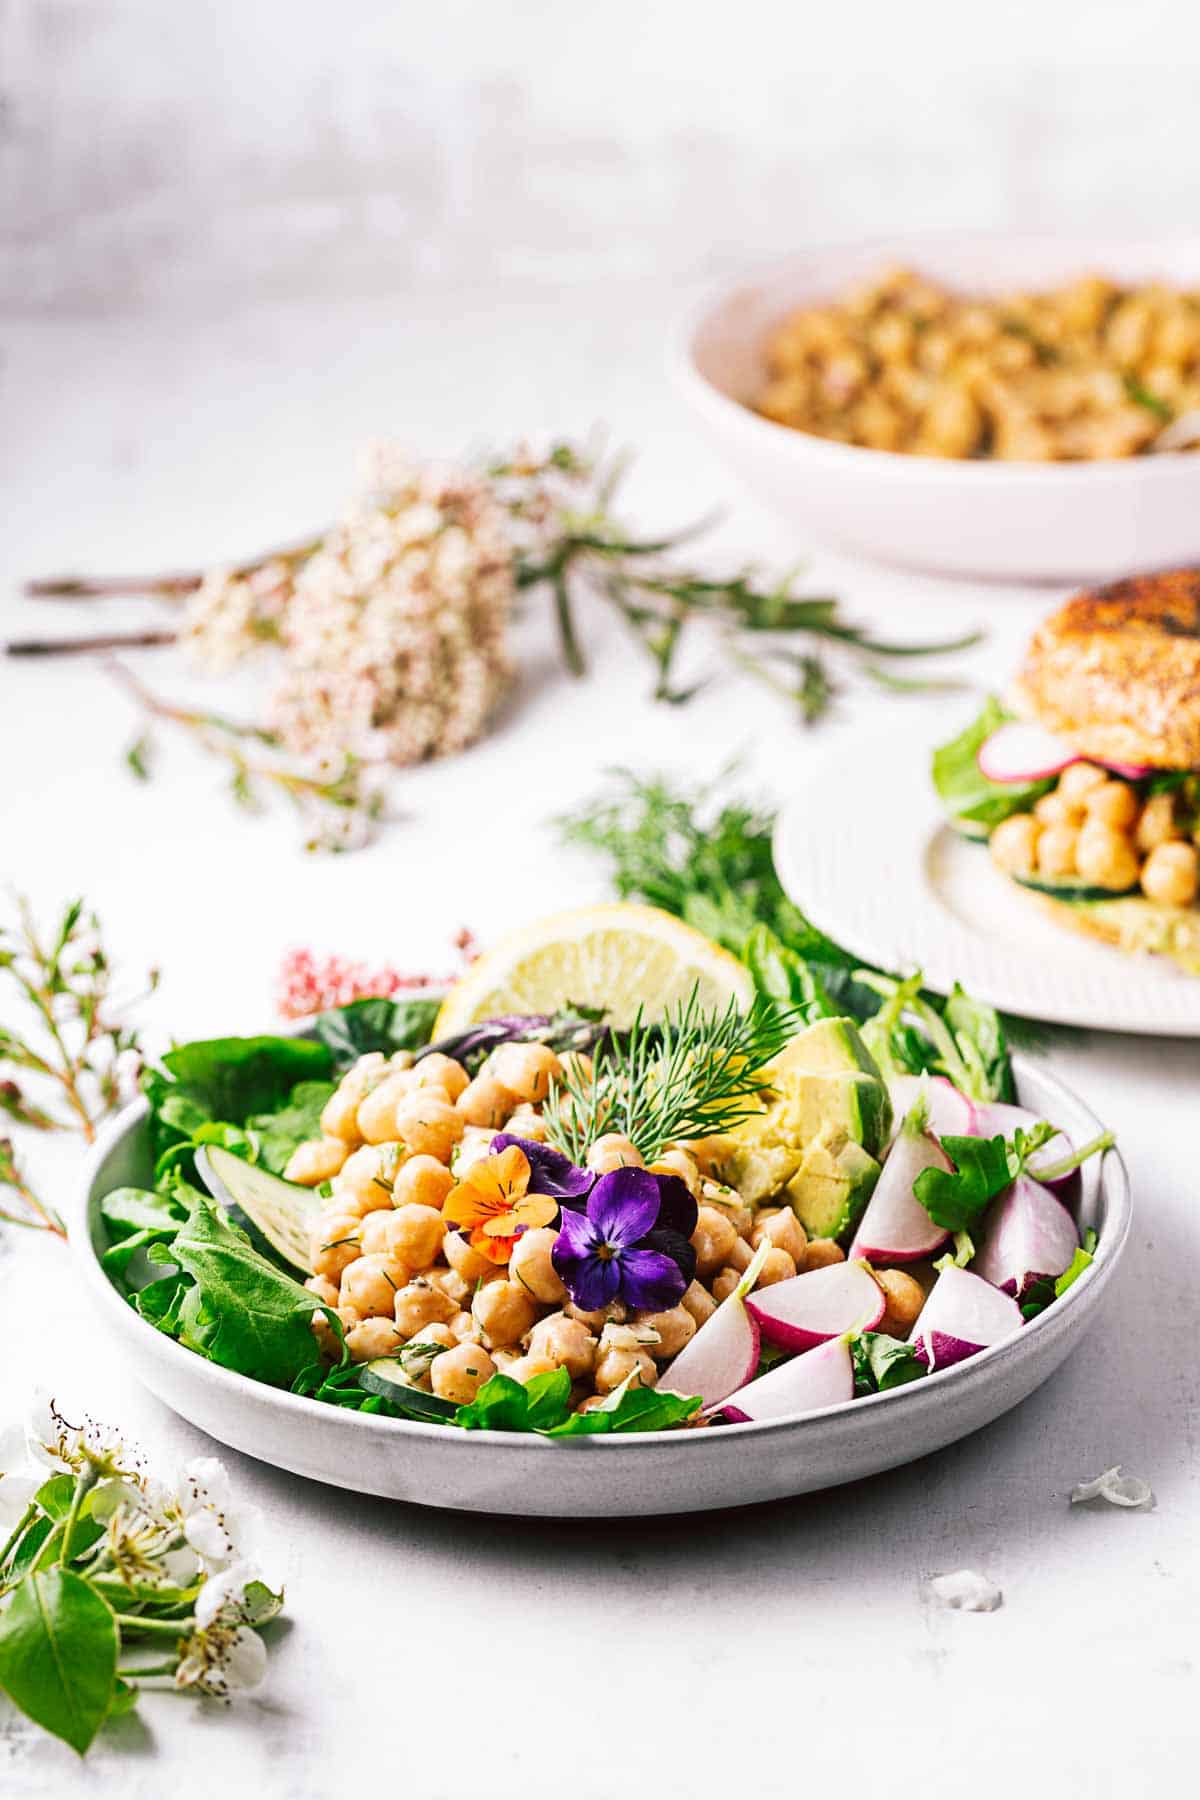 A salad bowl in the foreground with chickpea salad on top, a bagel sandwich filled with vegan chickpea salad behind, and a bowl of just vegan chickpea salad behind that.